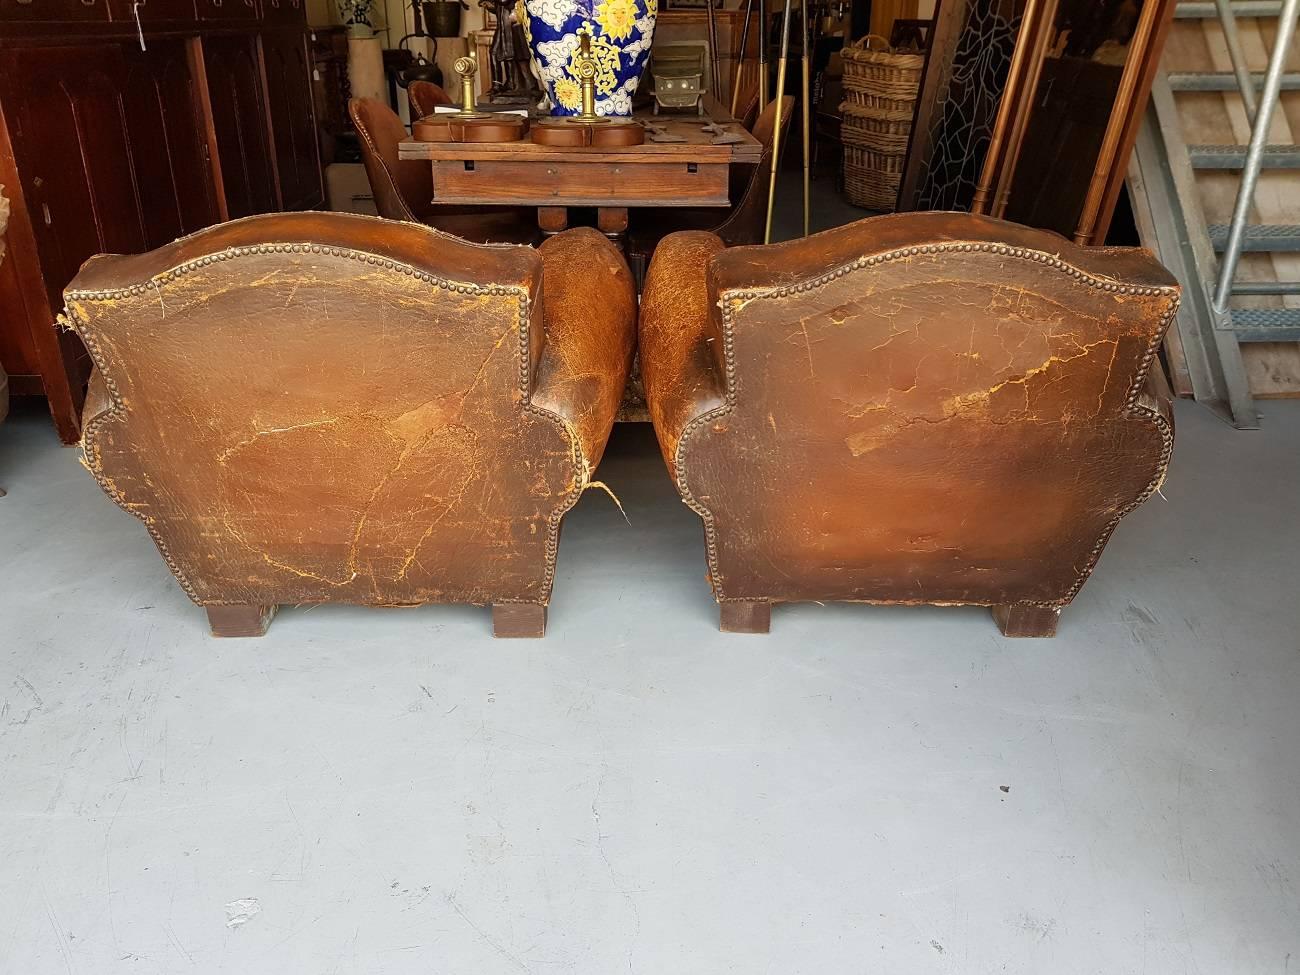 20th Century Two French Leather Club Chairs from the 1930s